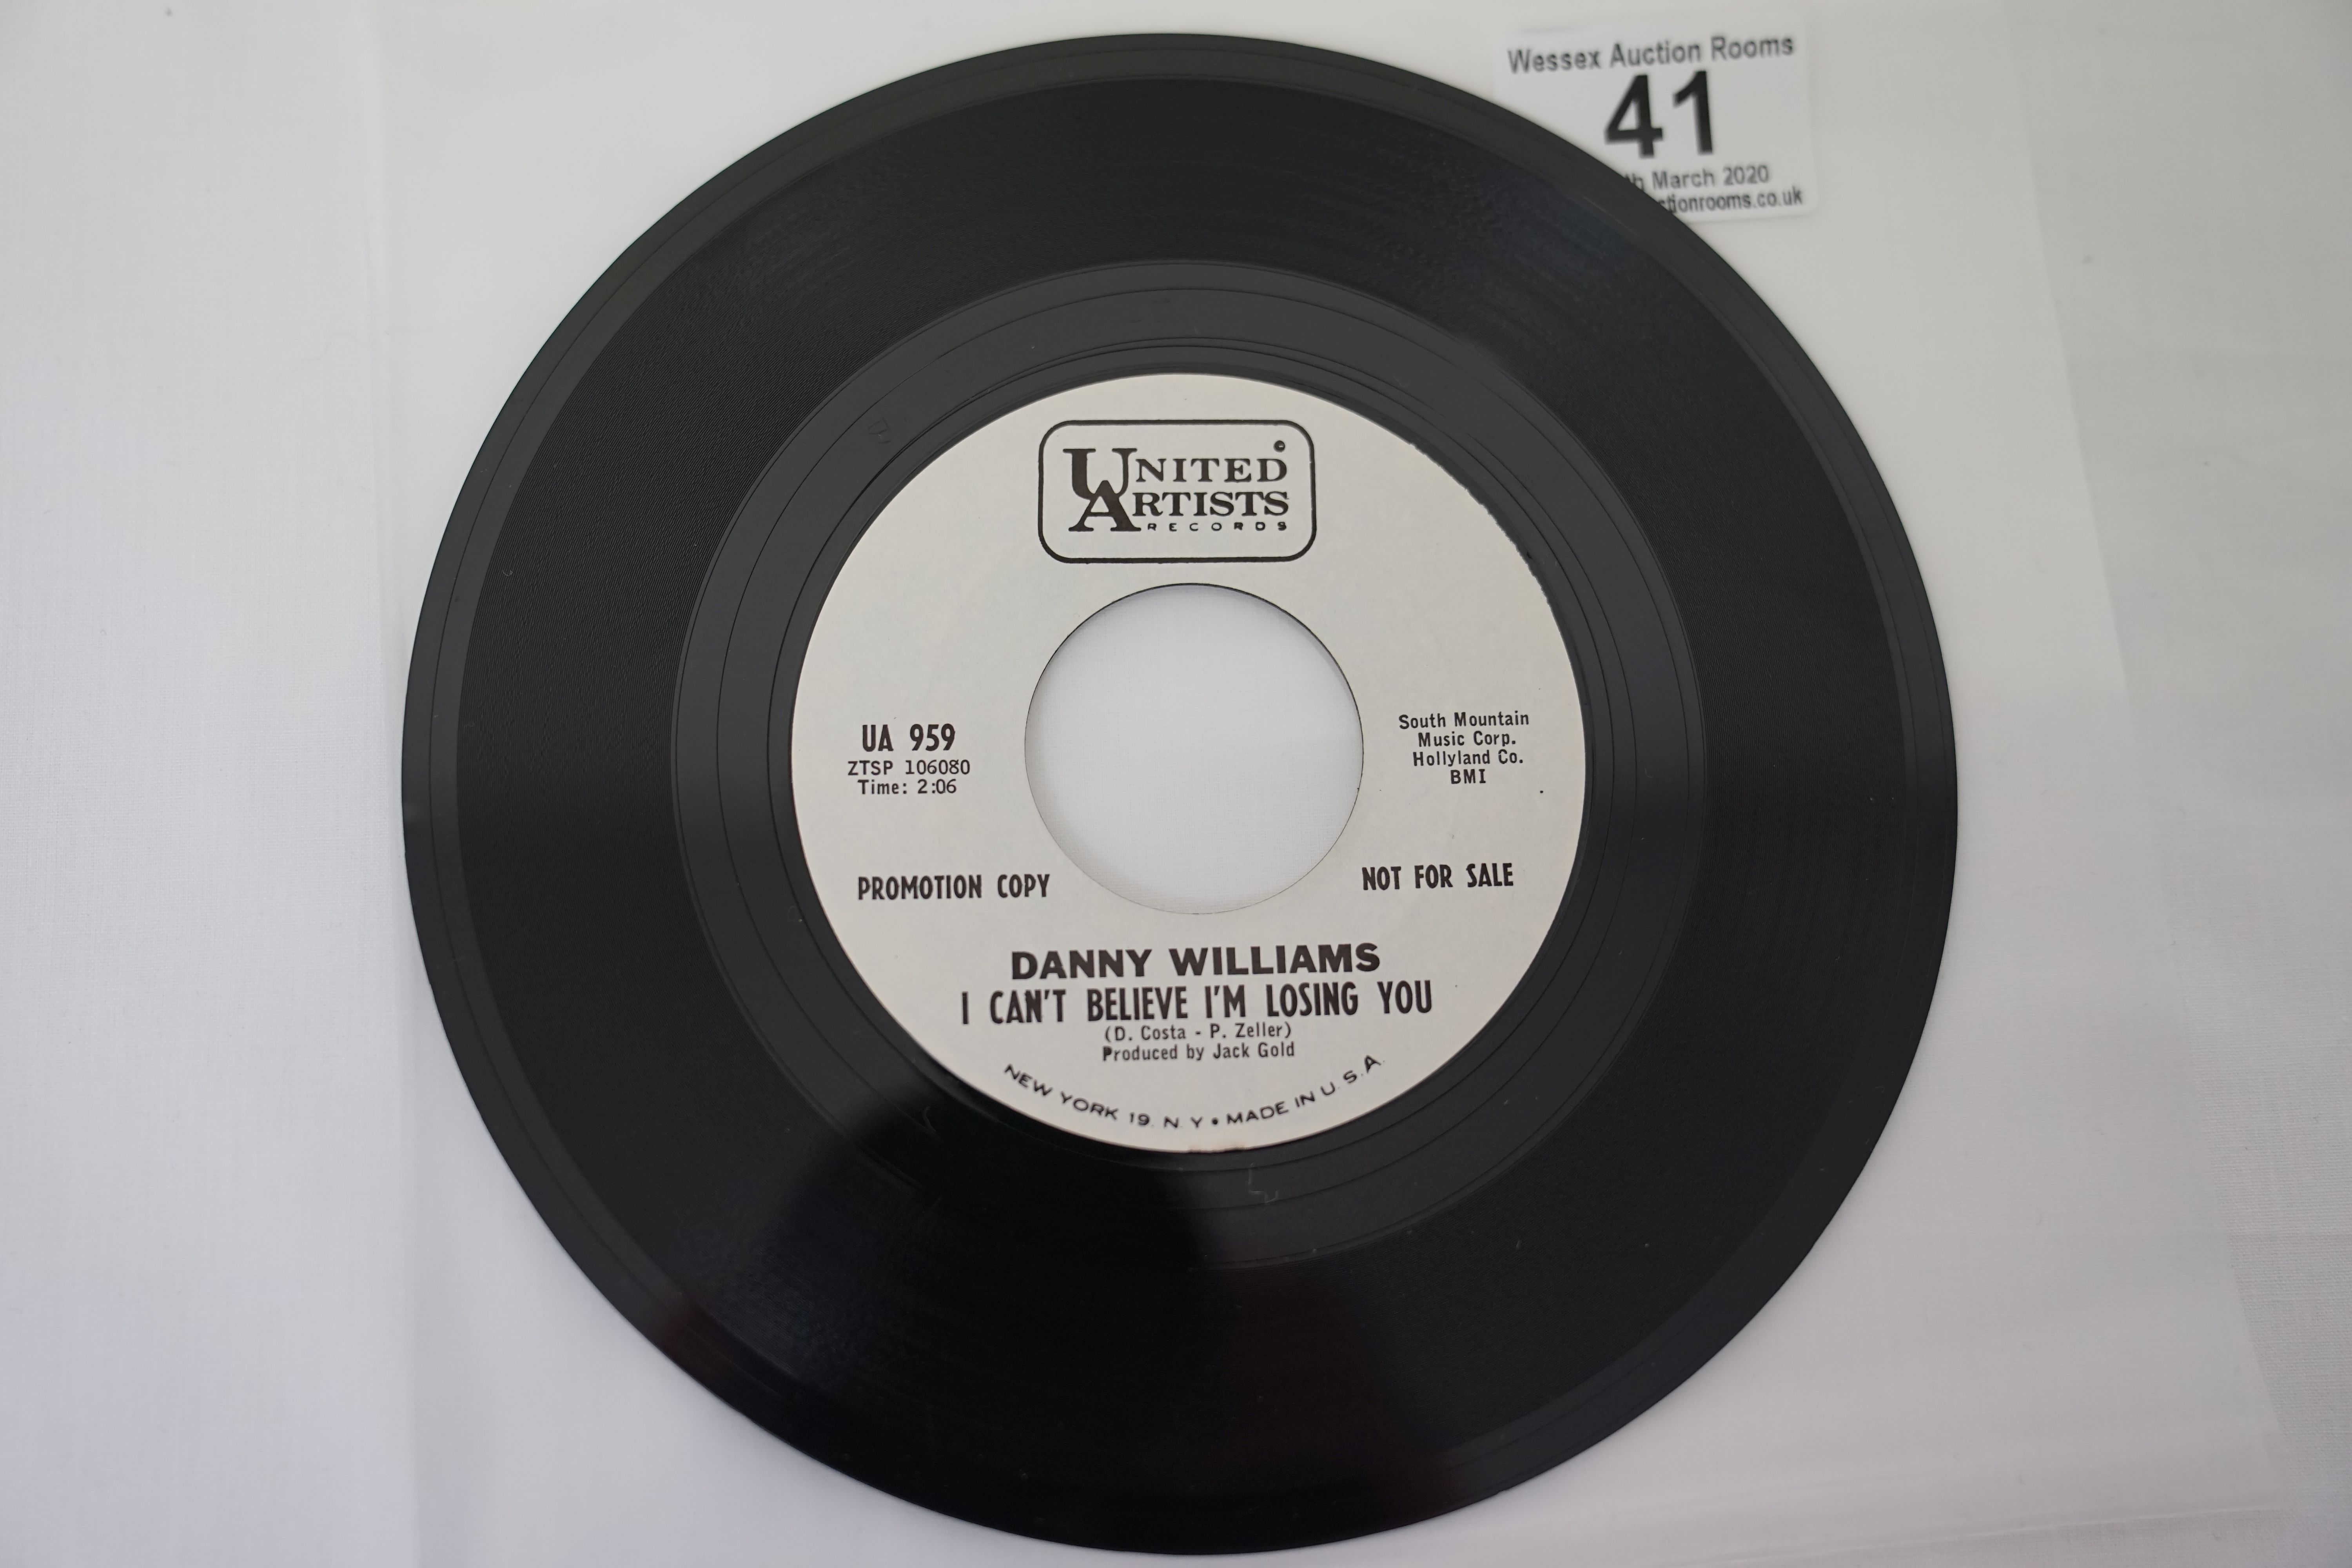 Vinyl - 5 rare original US 1st pressing Northern Soul Promo copies on United Artists Records. - Image 15 of 22